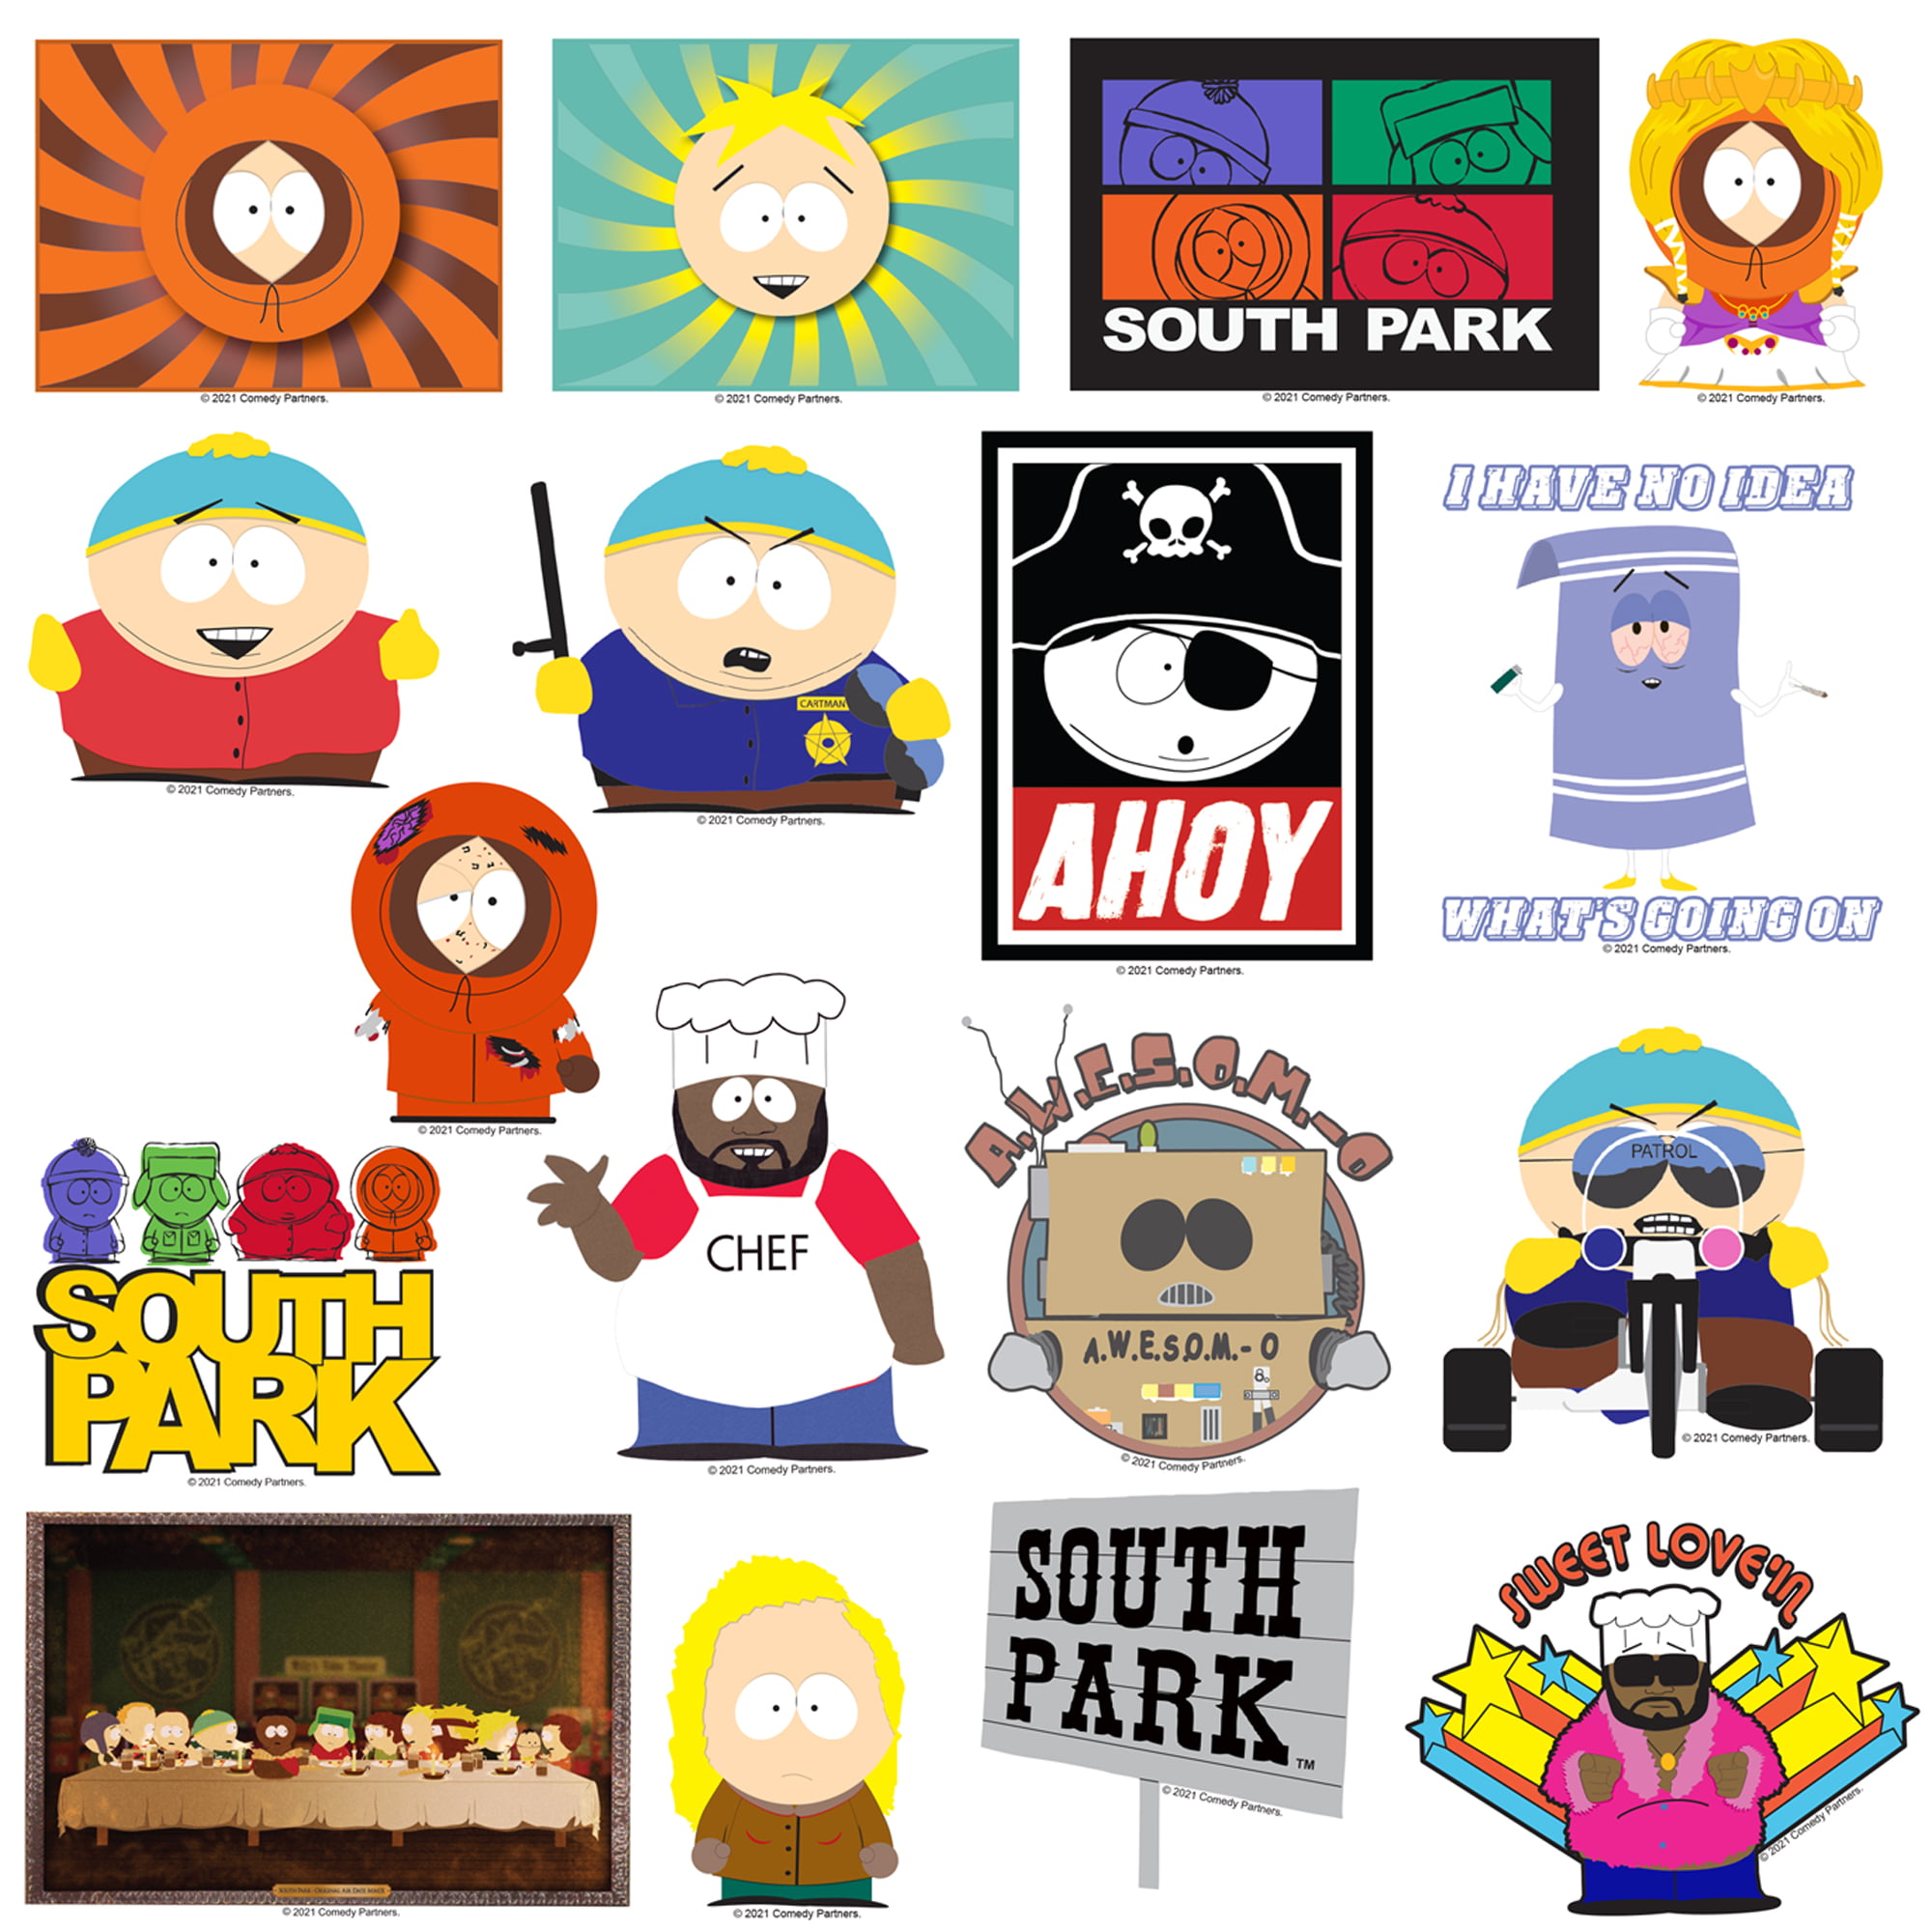  South Park Characters Decal Stickers Assorted Lot of 21 Pieces  : Toys & Games